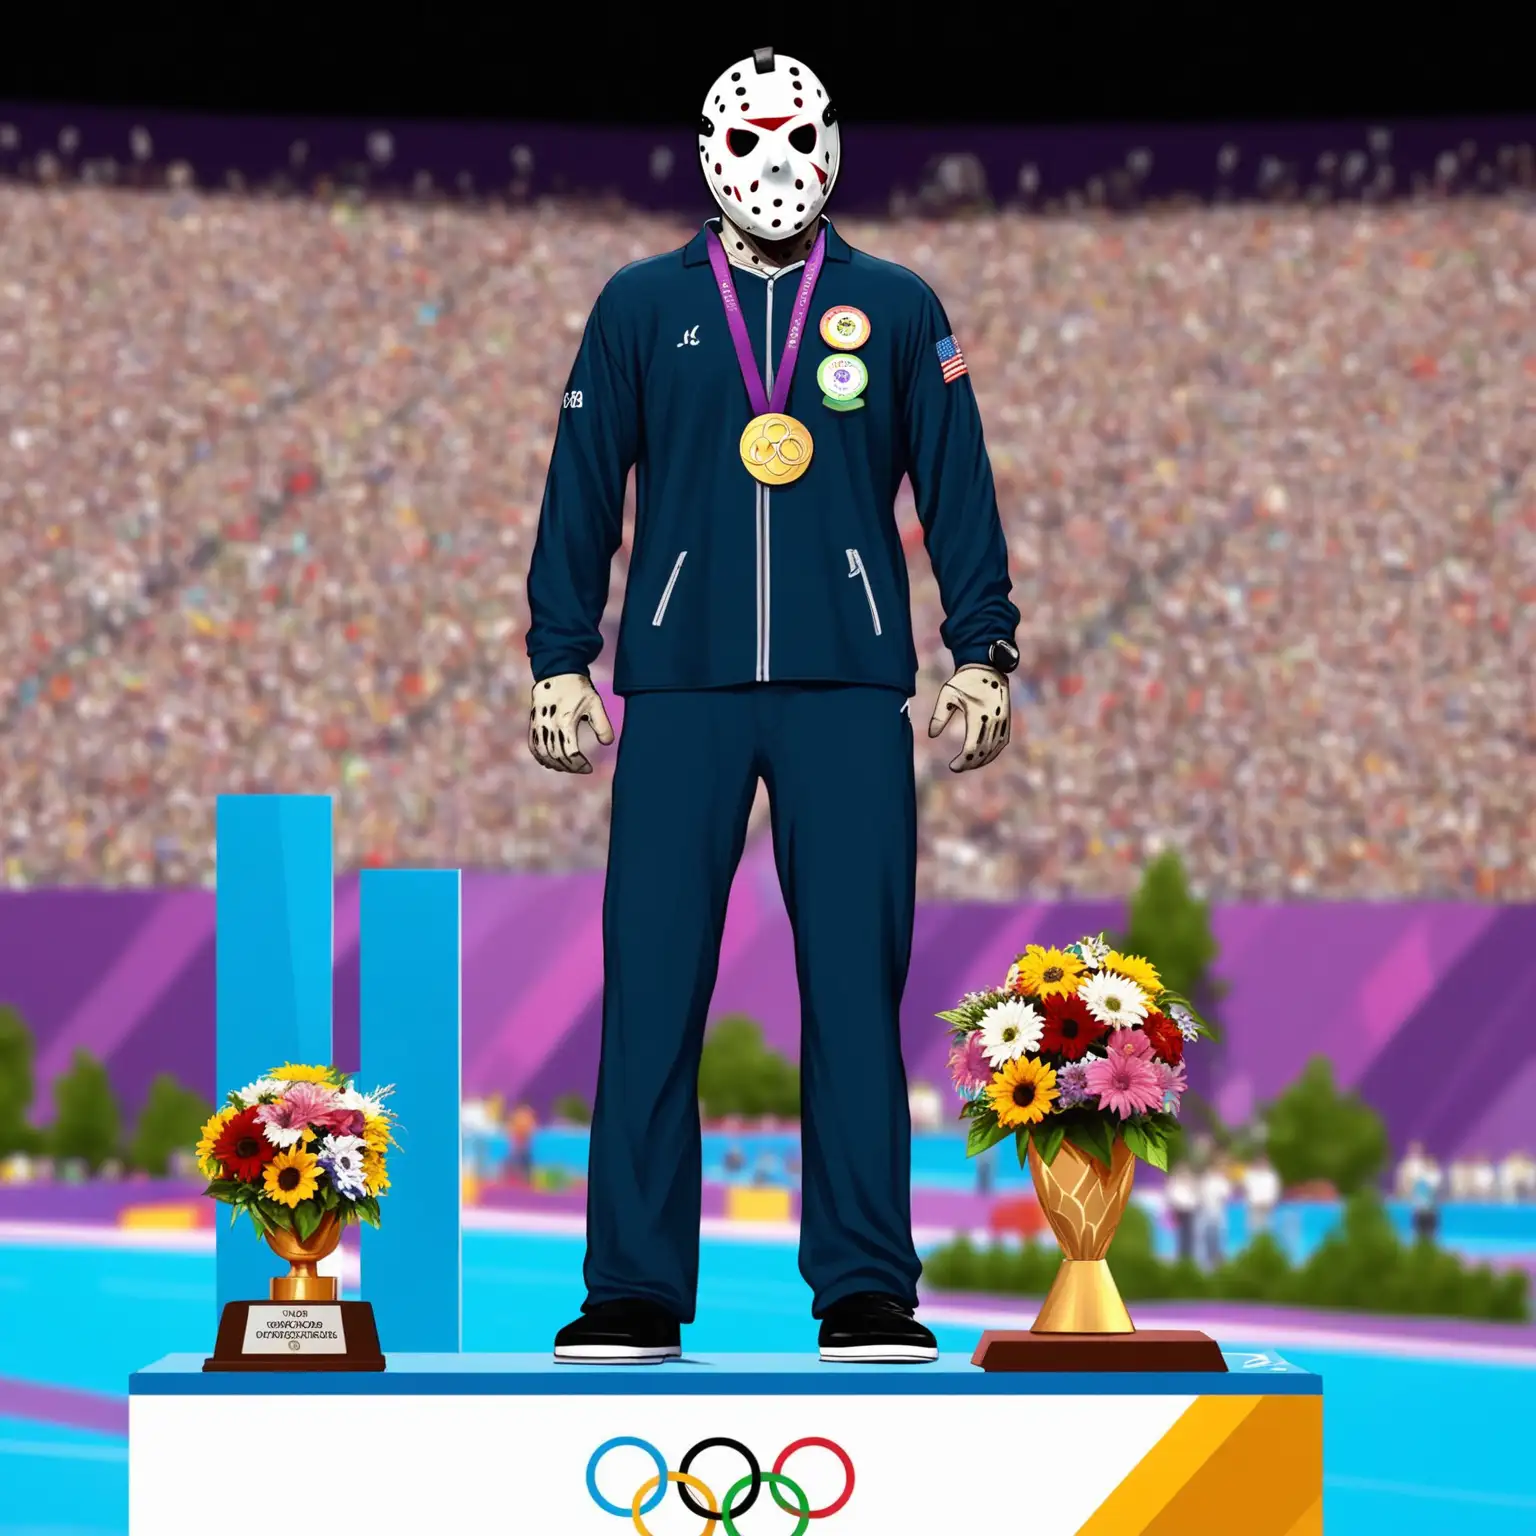 jason vorhees standing on the winners podium at the summer olympics
